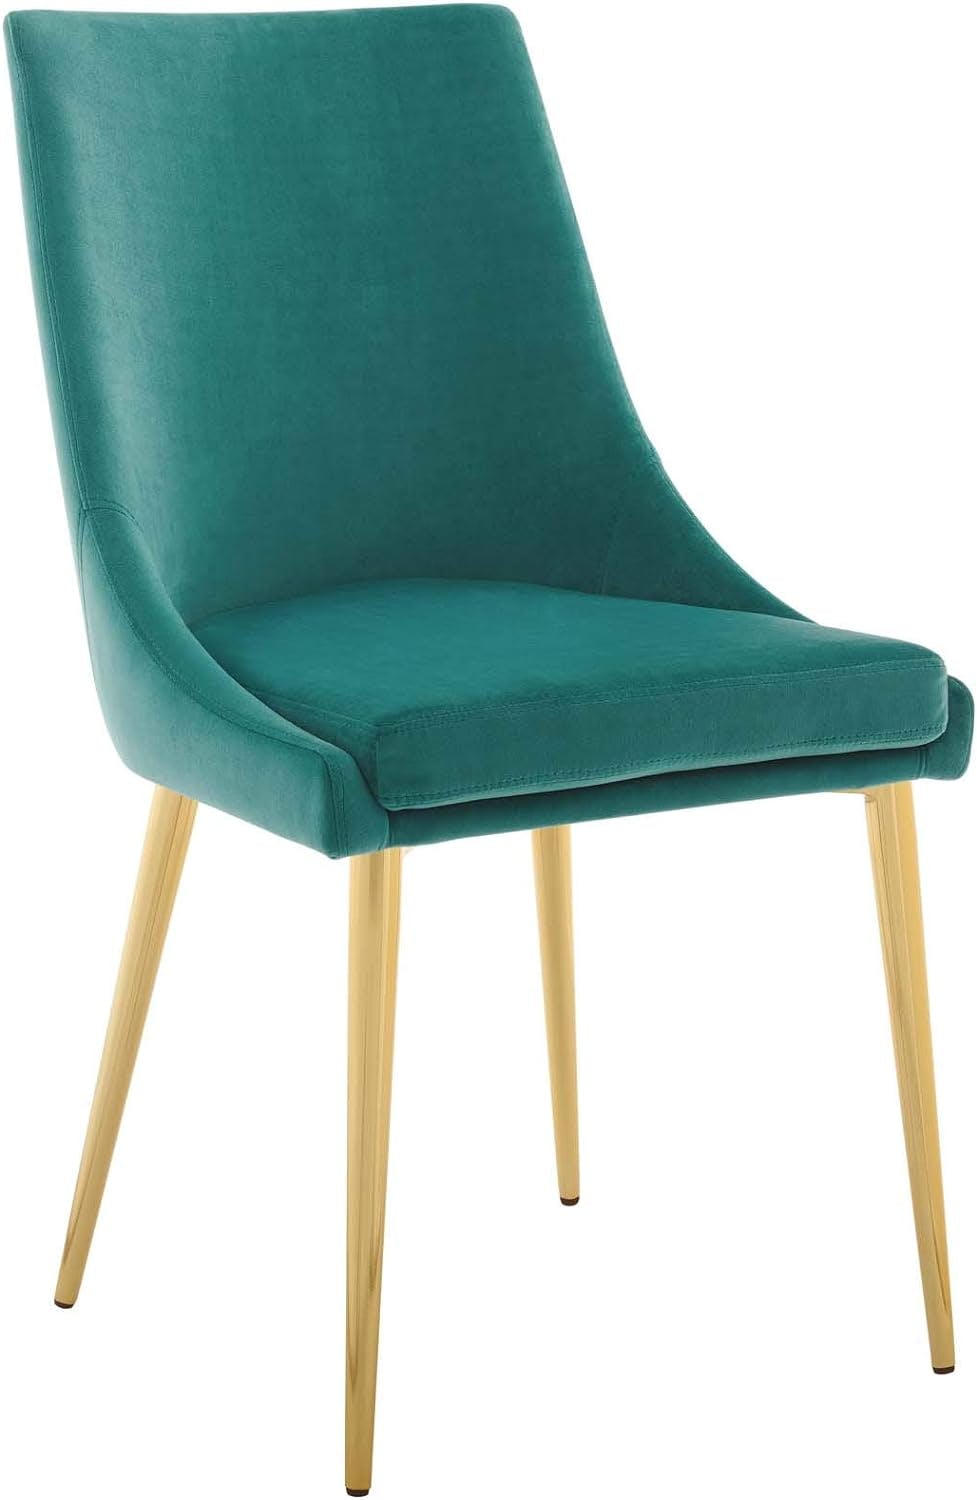 Teal Velvet Upholstered Accent Dining Chair with Metal Legs